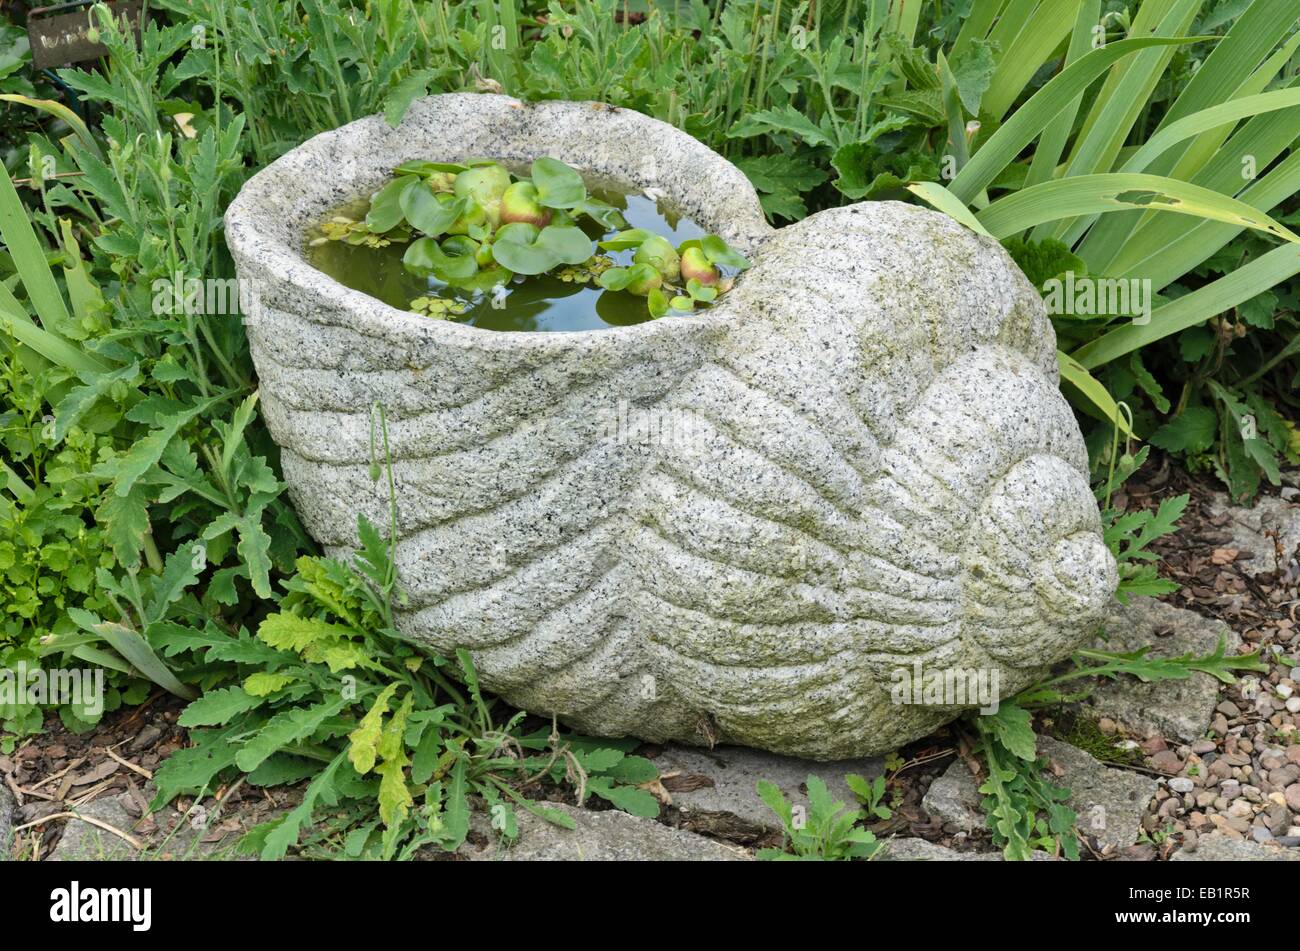 Water hyacinth (Eichhornia crassipes) in a stone snail Stock Photo